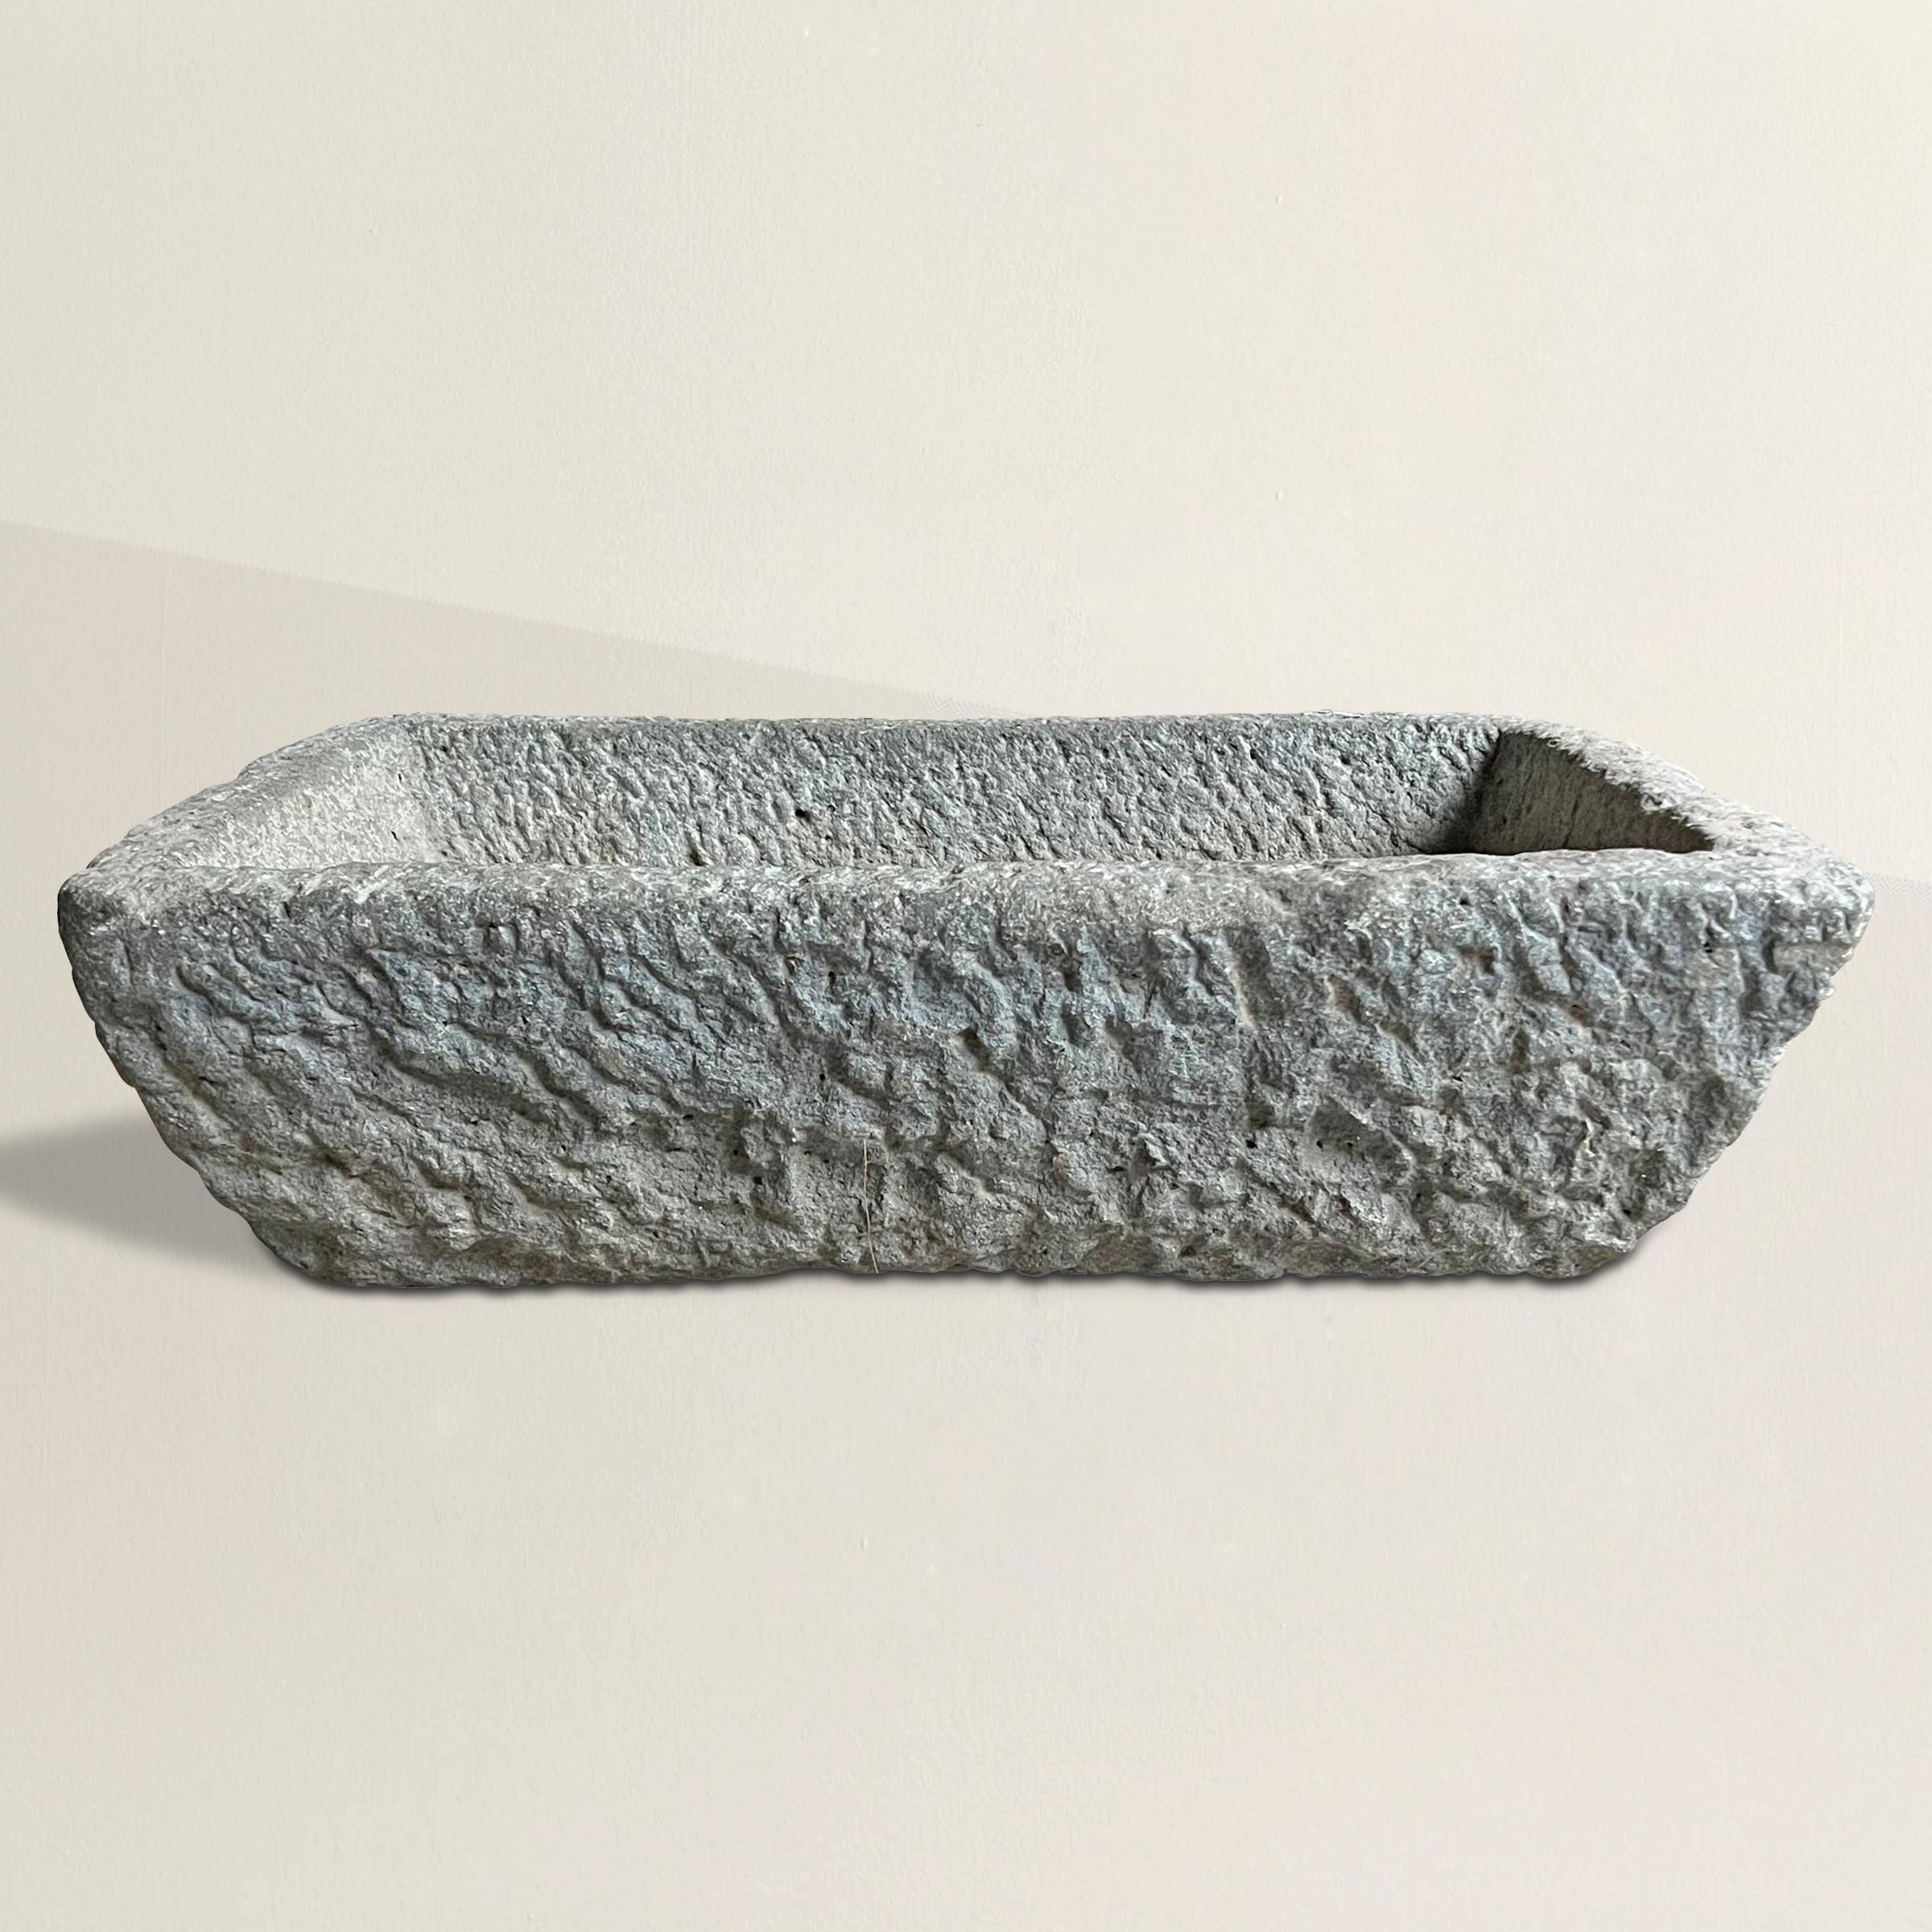 A simple yet chic 20th century hand carved granite planter with the most wonderful rough-hewn surface. Perfect for planting your favorite annuals or herbs to keep on your patio, or placed somewhere special in your garden.